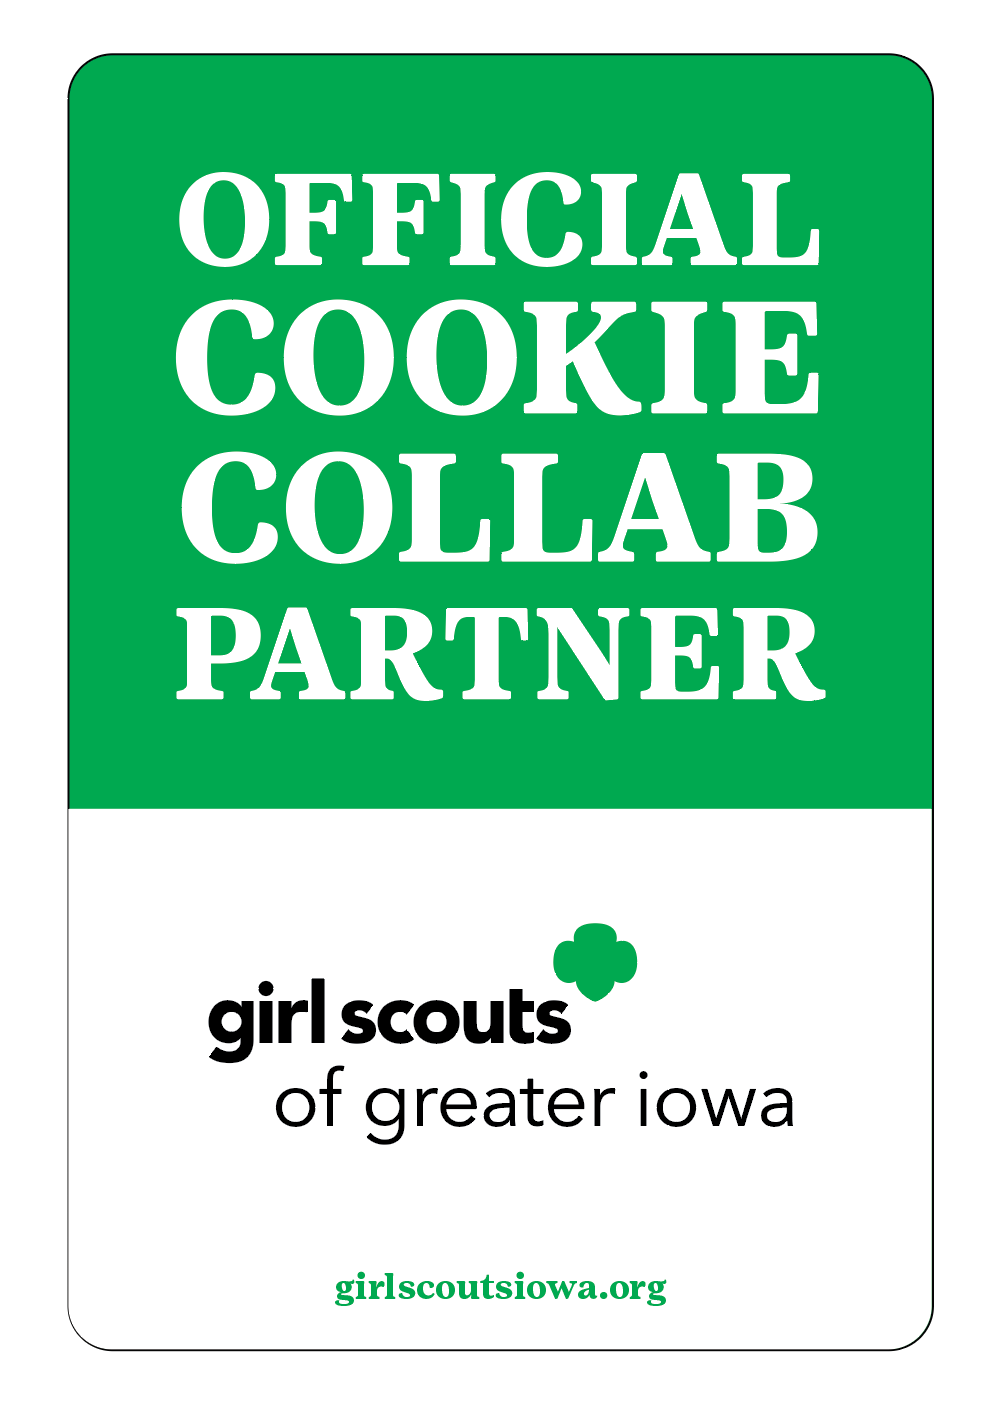 Image of rectangular green and white window cling with words "Official Cookie Collab Partner" written on top and Girl Scouts of Greater Iowa logo below.